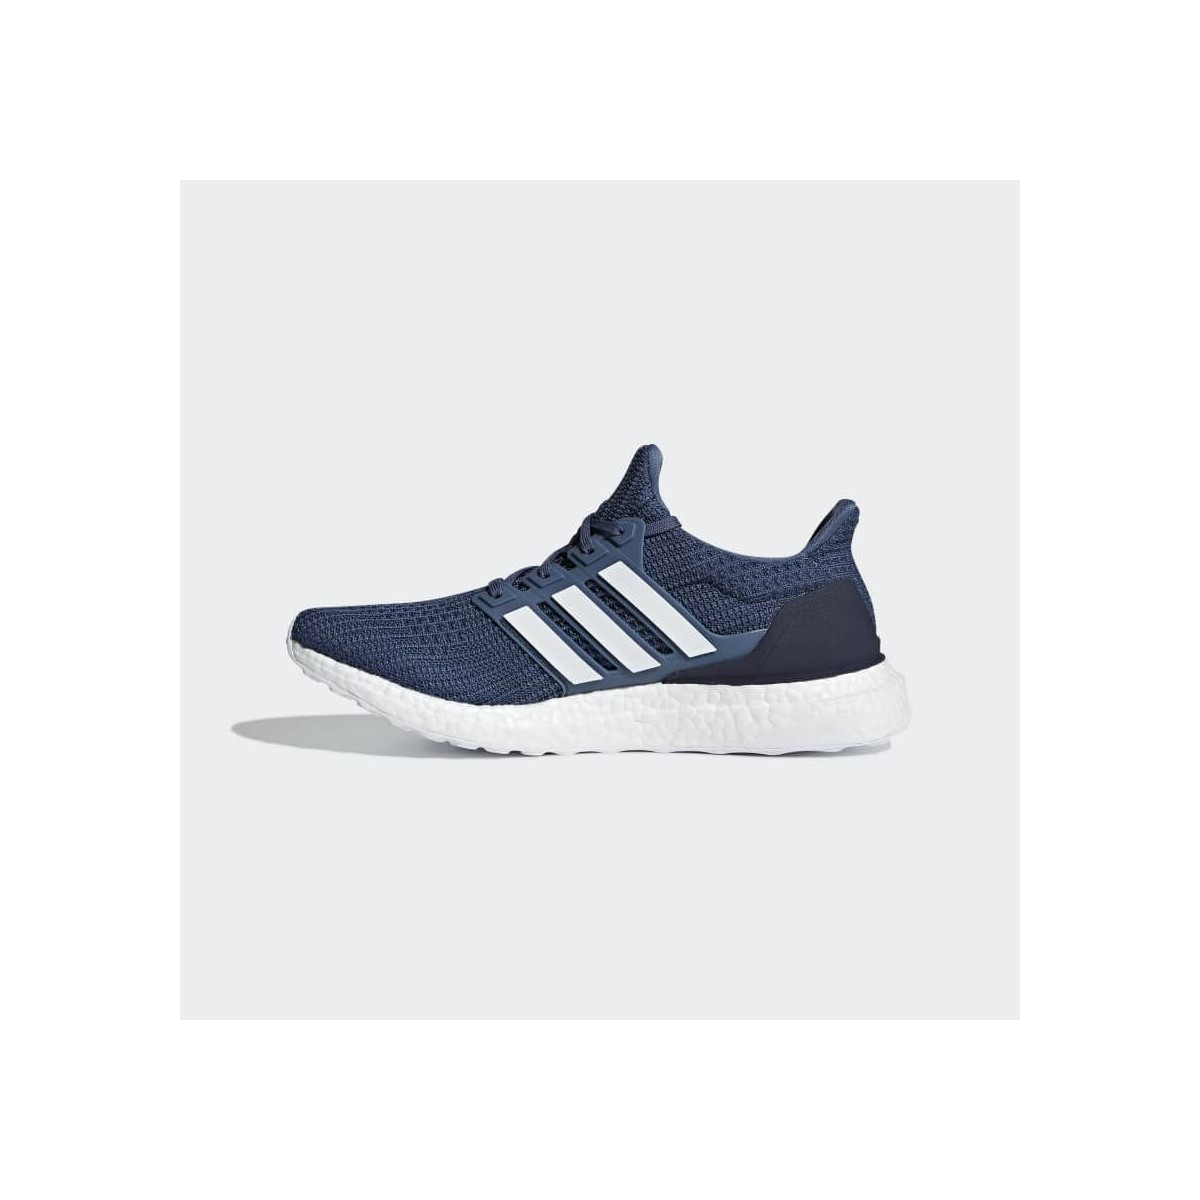 Adidas Ultra Boost Blue White FW18 Man Running shoes